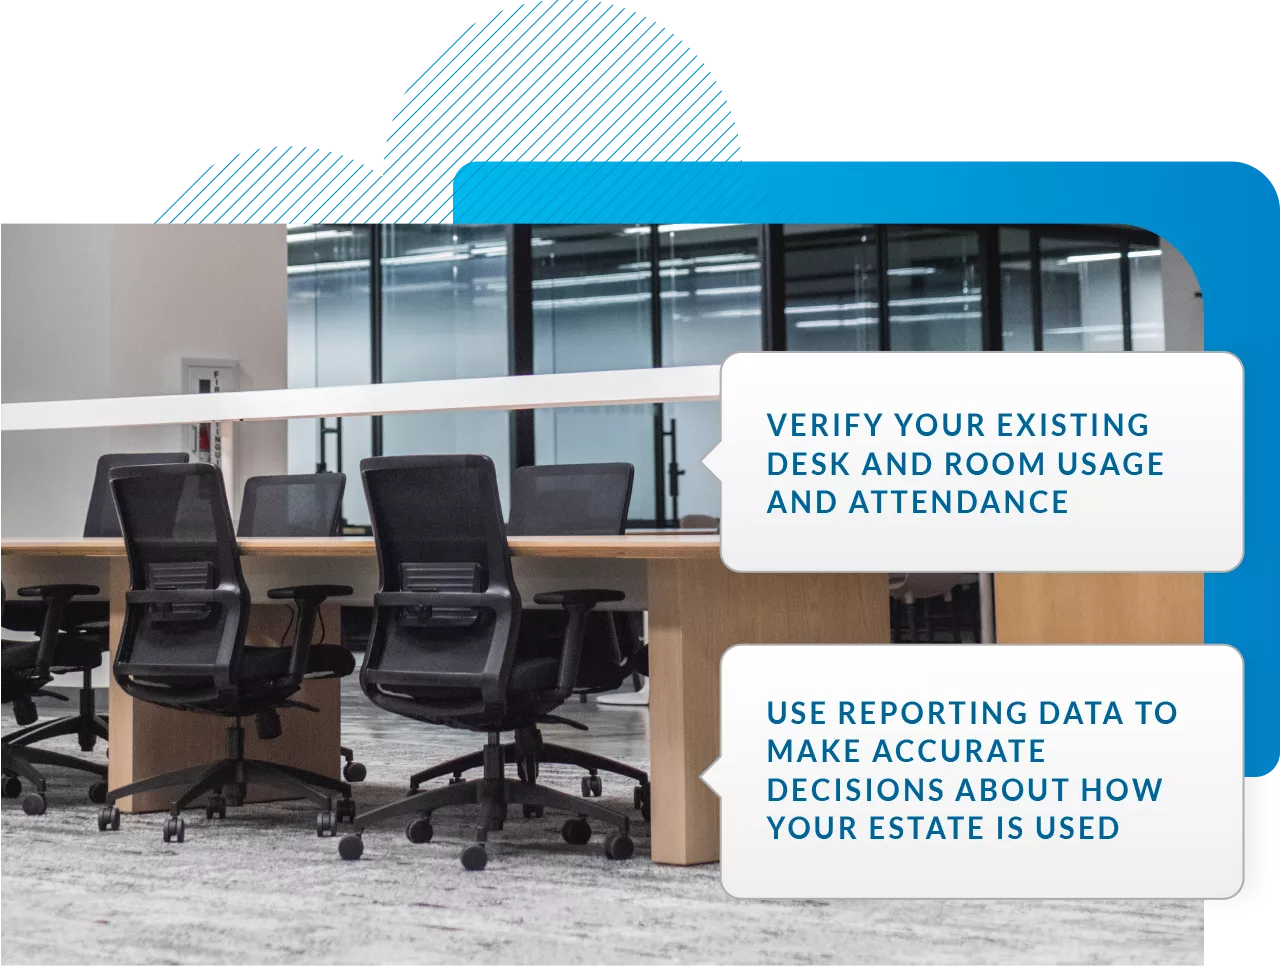 Cloudbooking can help government organisations make space efficiency decisions with flexible working